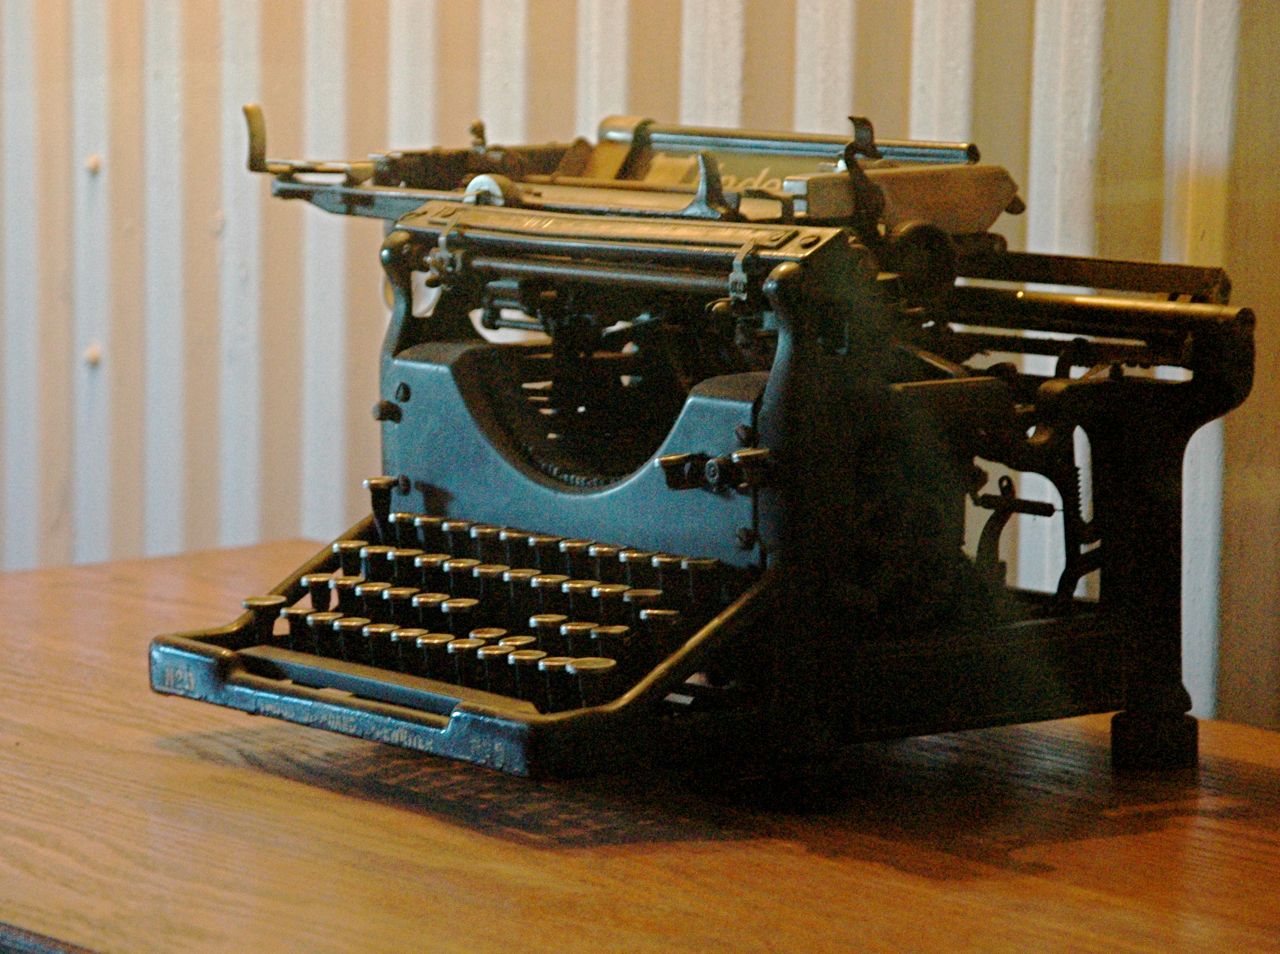 an old - fashioned typewriter is on a desk